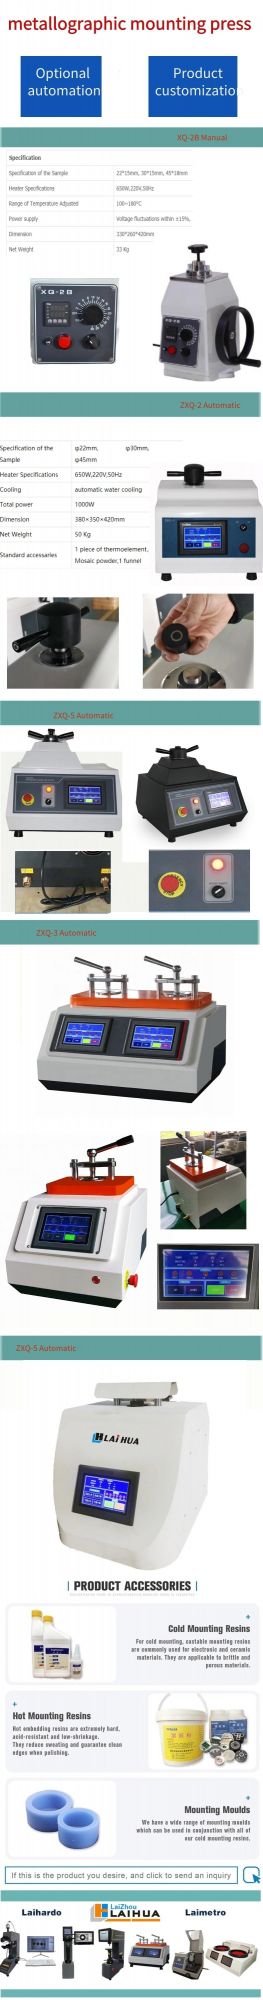 Zxq-2 Full Automatic Double Capacity Heat Mounting Press /Hot Metallographic Inlaying / Sample Mounting Press Machine